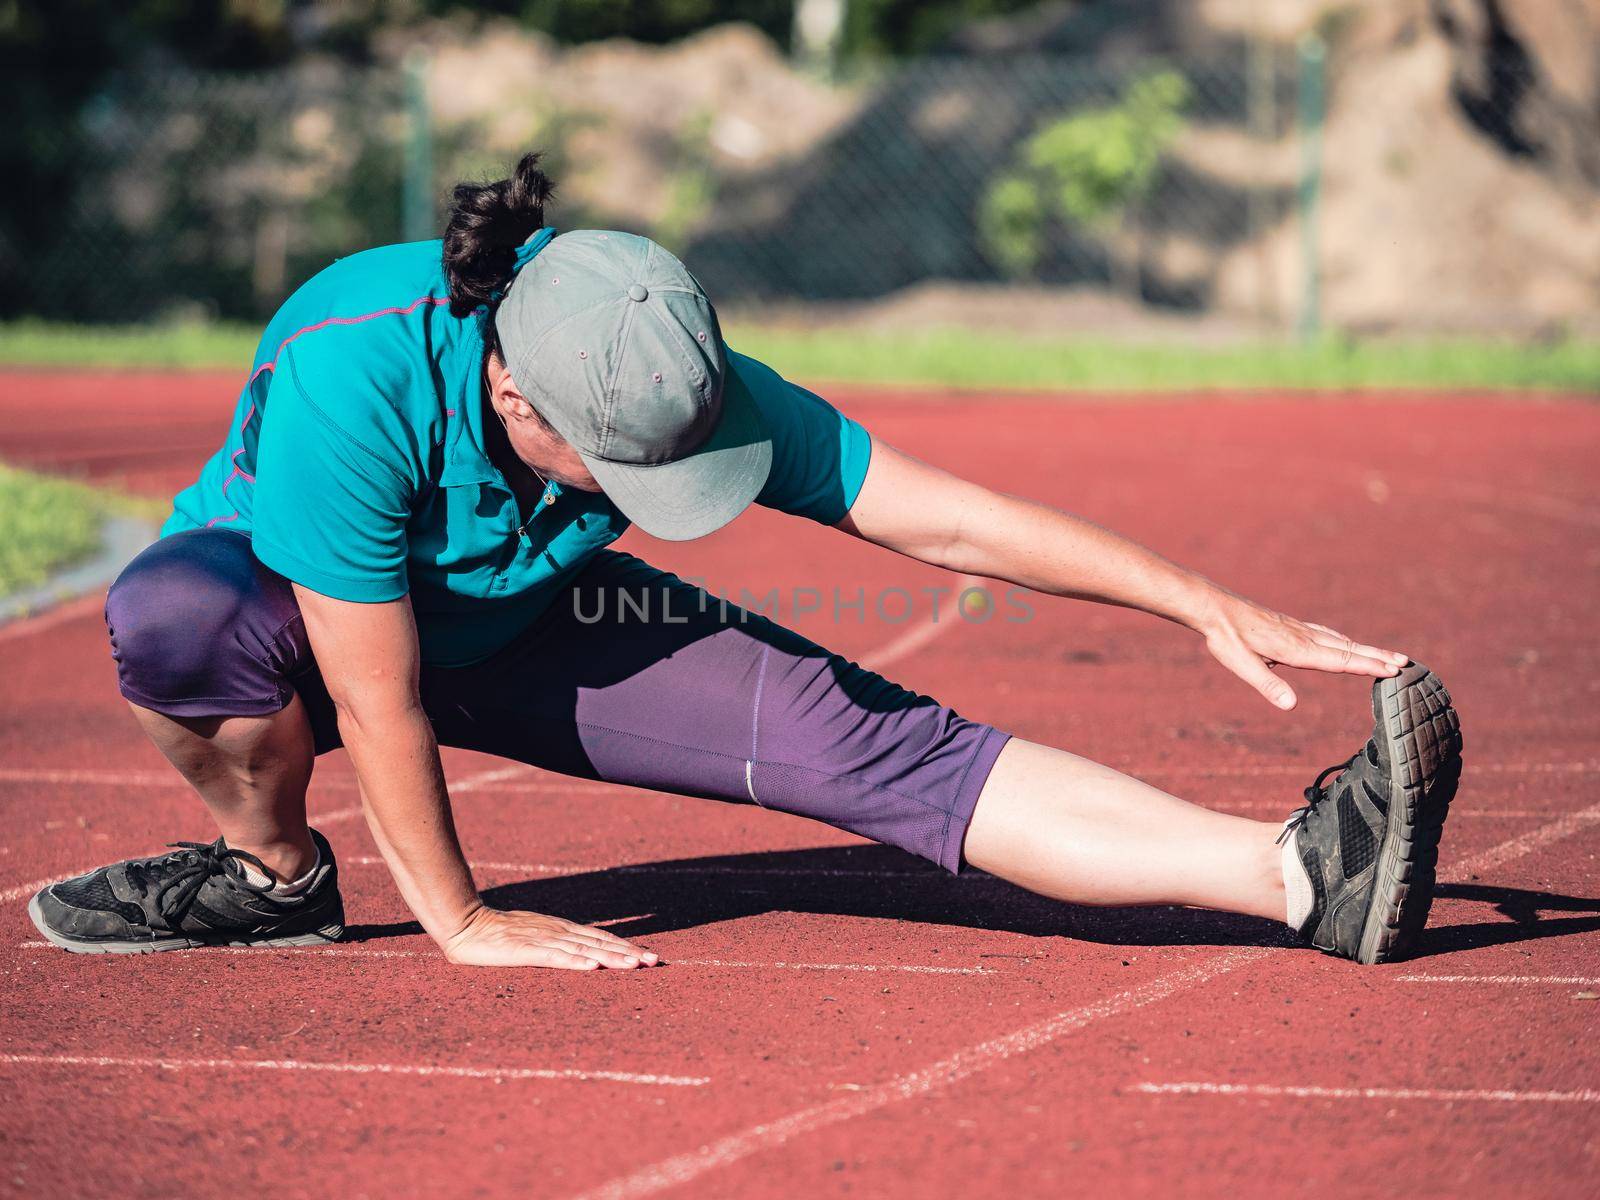 Athletic middle aged woman stretching on red  running track before training, healthy fitness lifestyle 